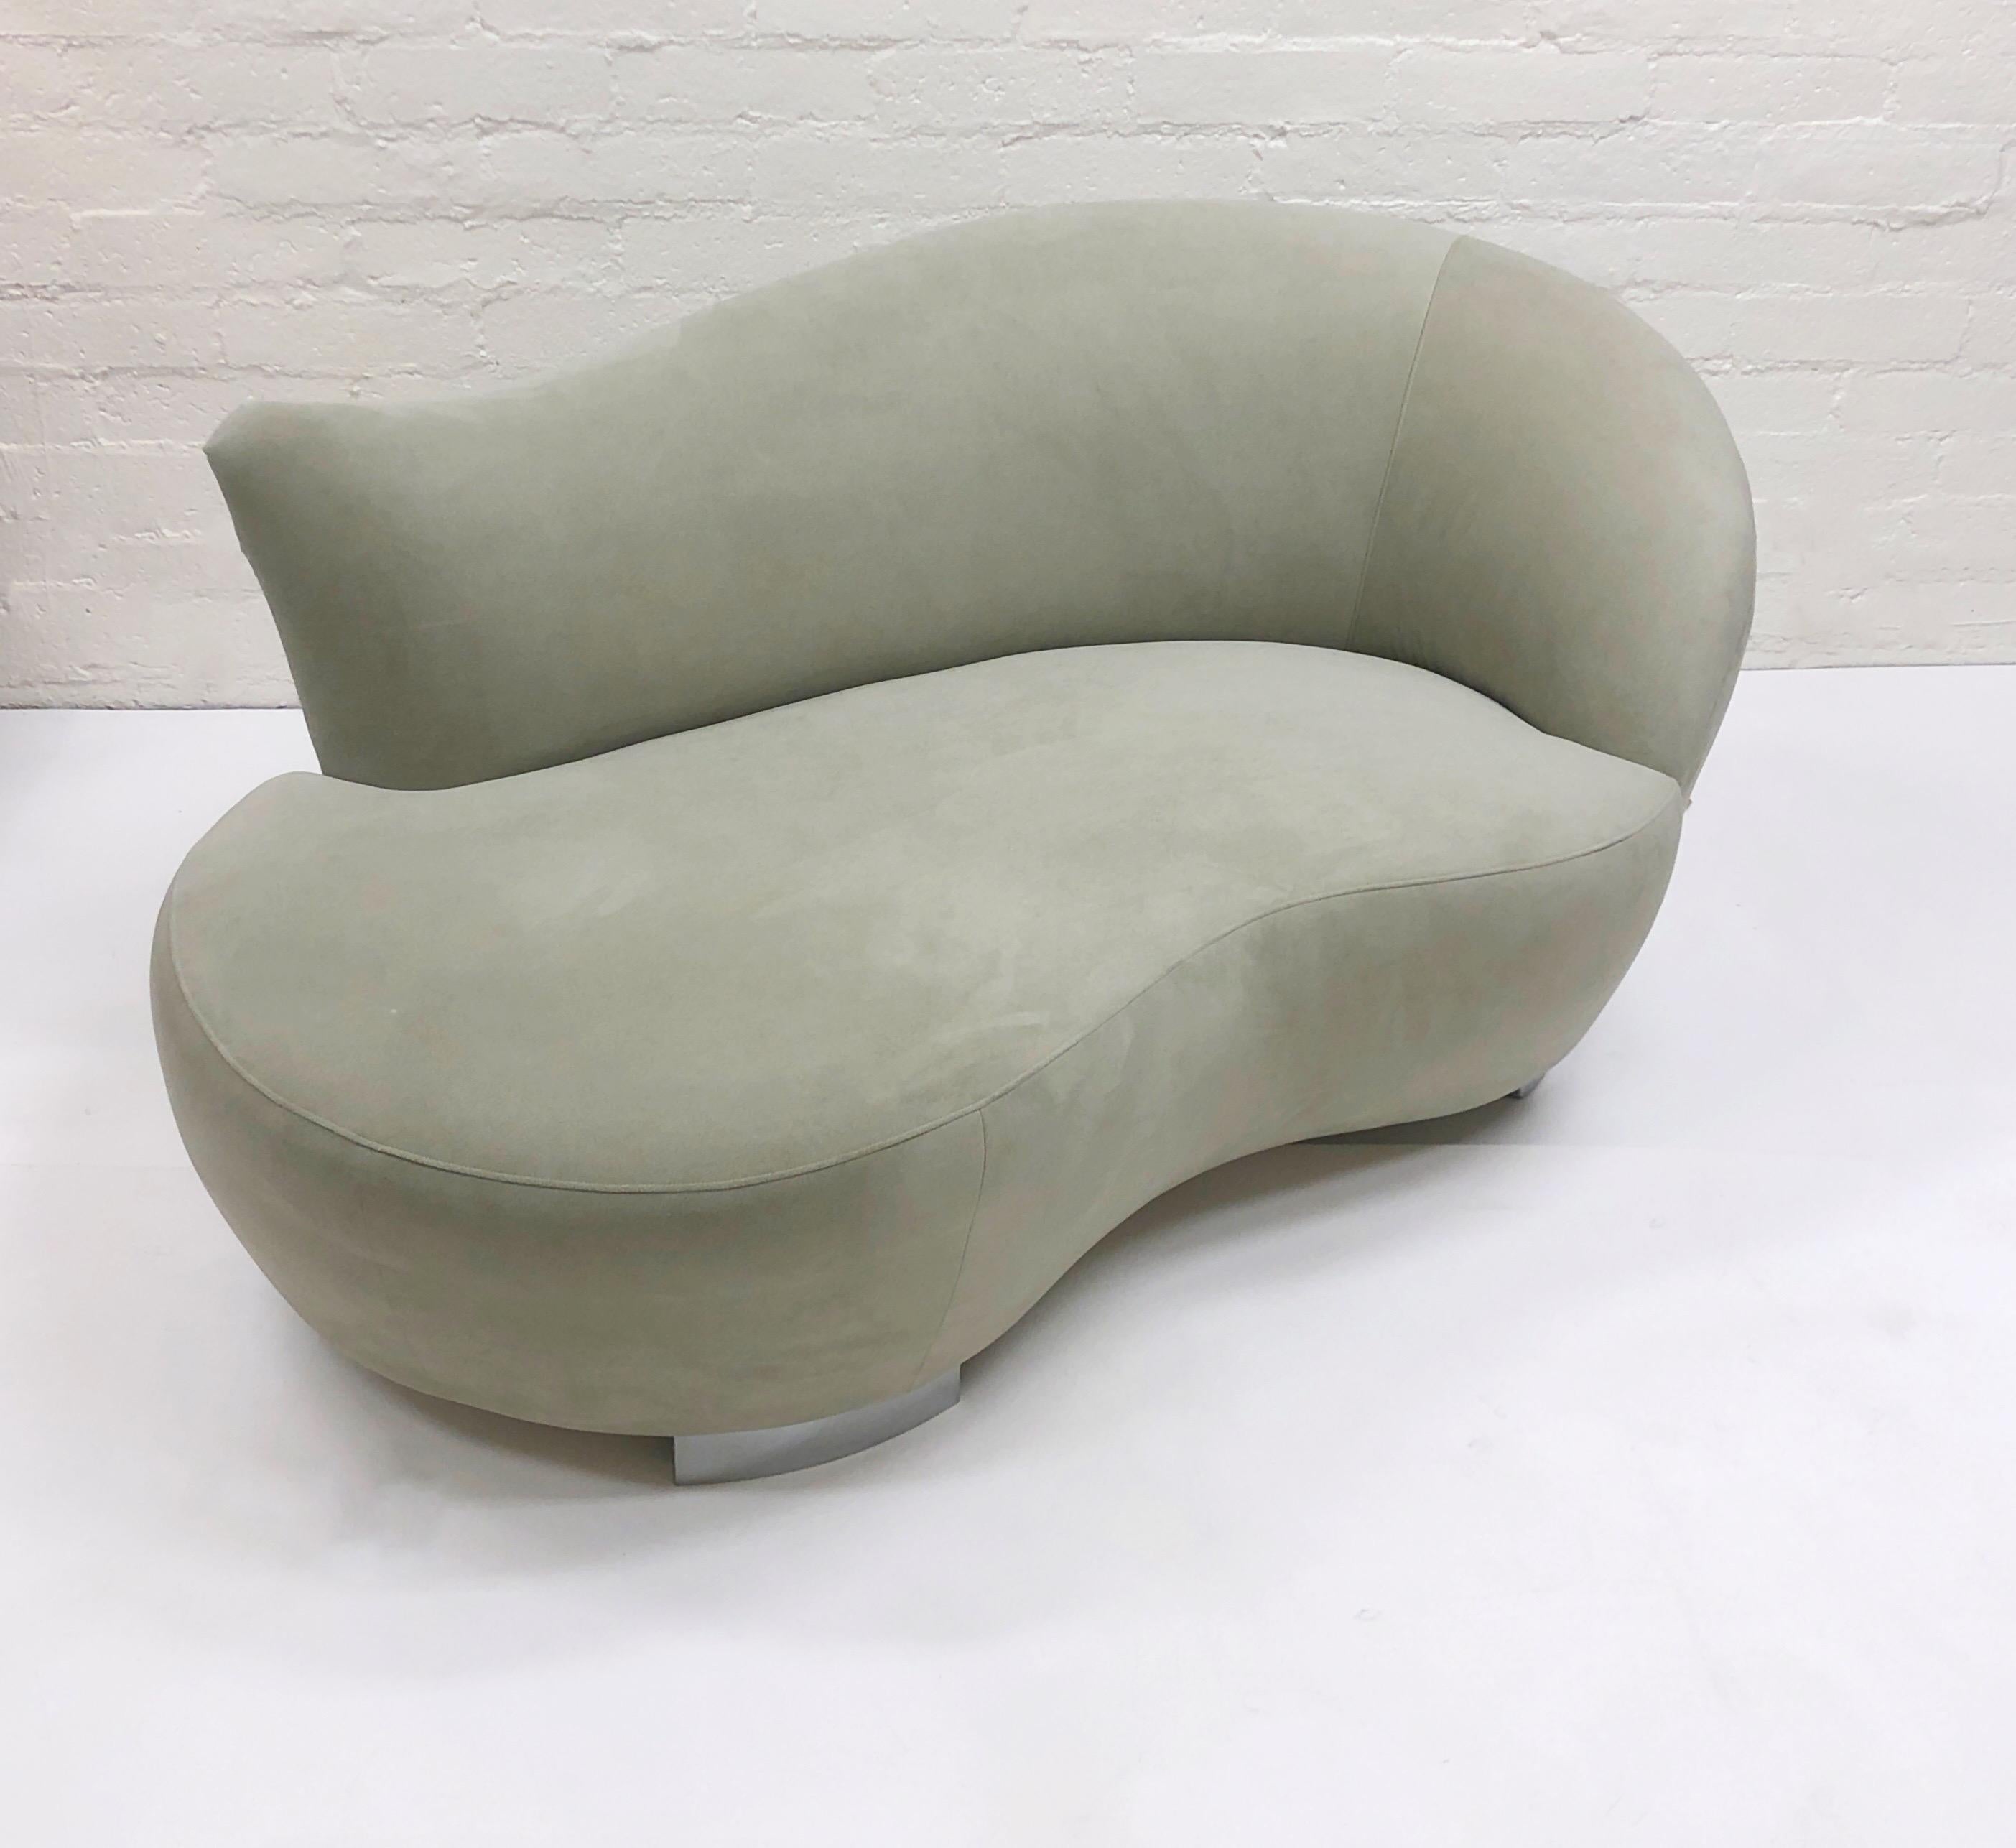 Ultrasuede and chrome Petite Cloud chaise lounge sofa by Weiman. 
In original condition, shows minor wear consistent with age. 
Measurements: 64” wide, 36” deep, 30.5” high, 15.5” seat.